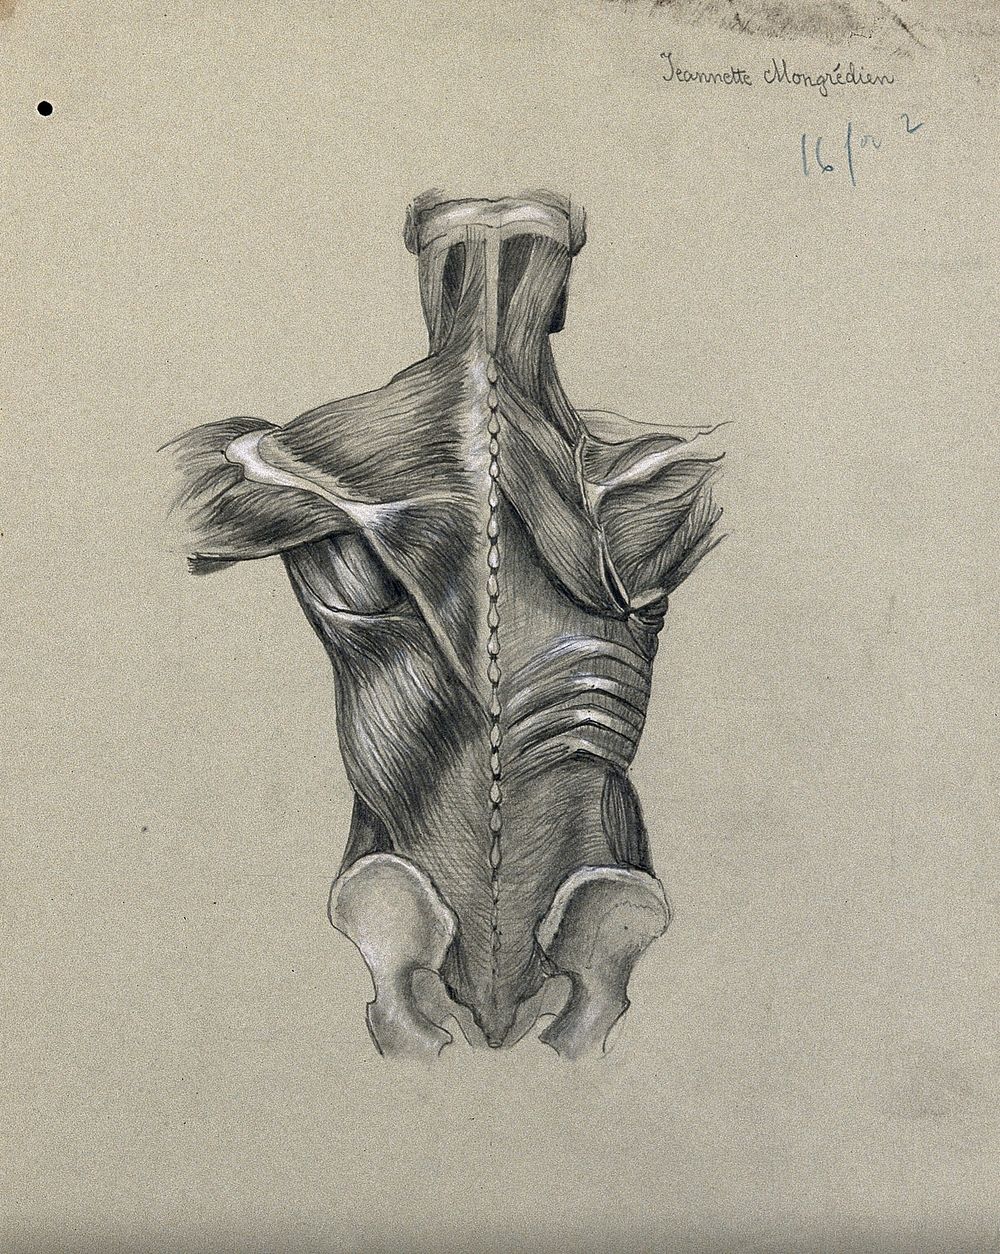 Muscles of the trunk: side view. Pencil and chalk drawing by J. Mongrédien, ca. 1880.